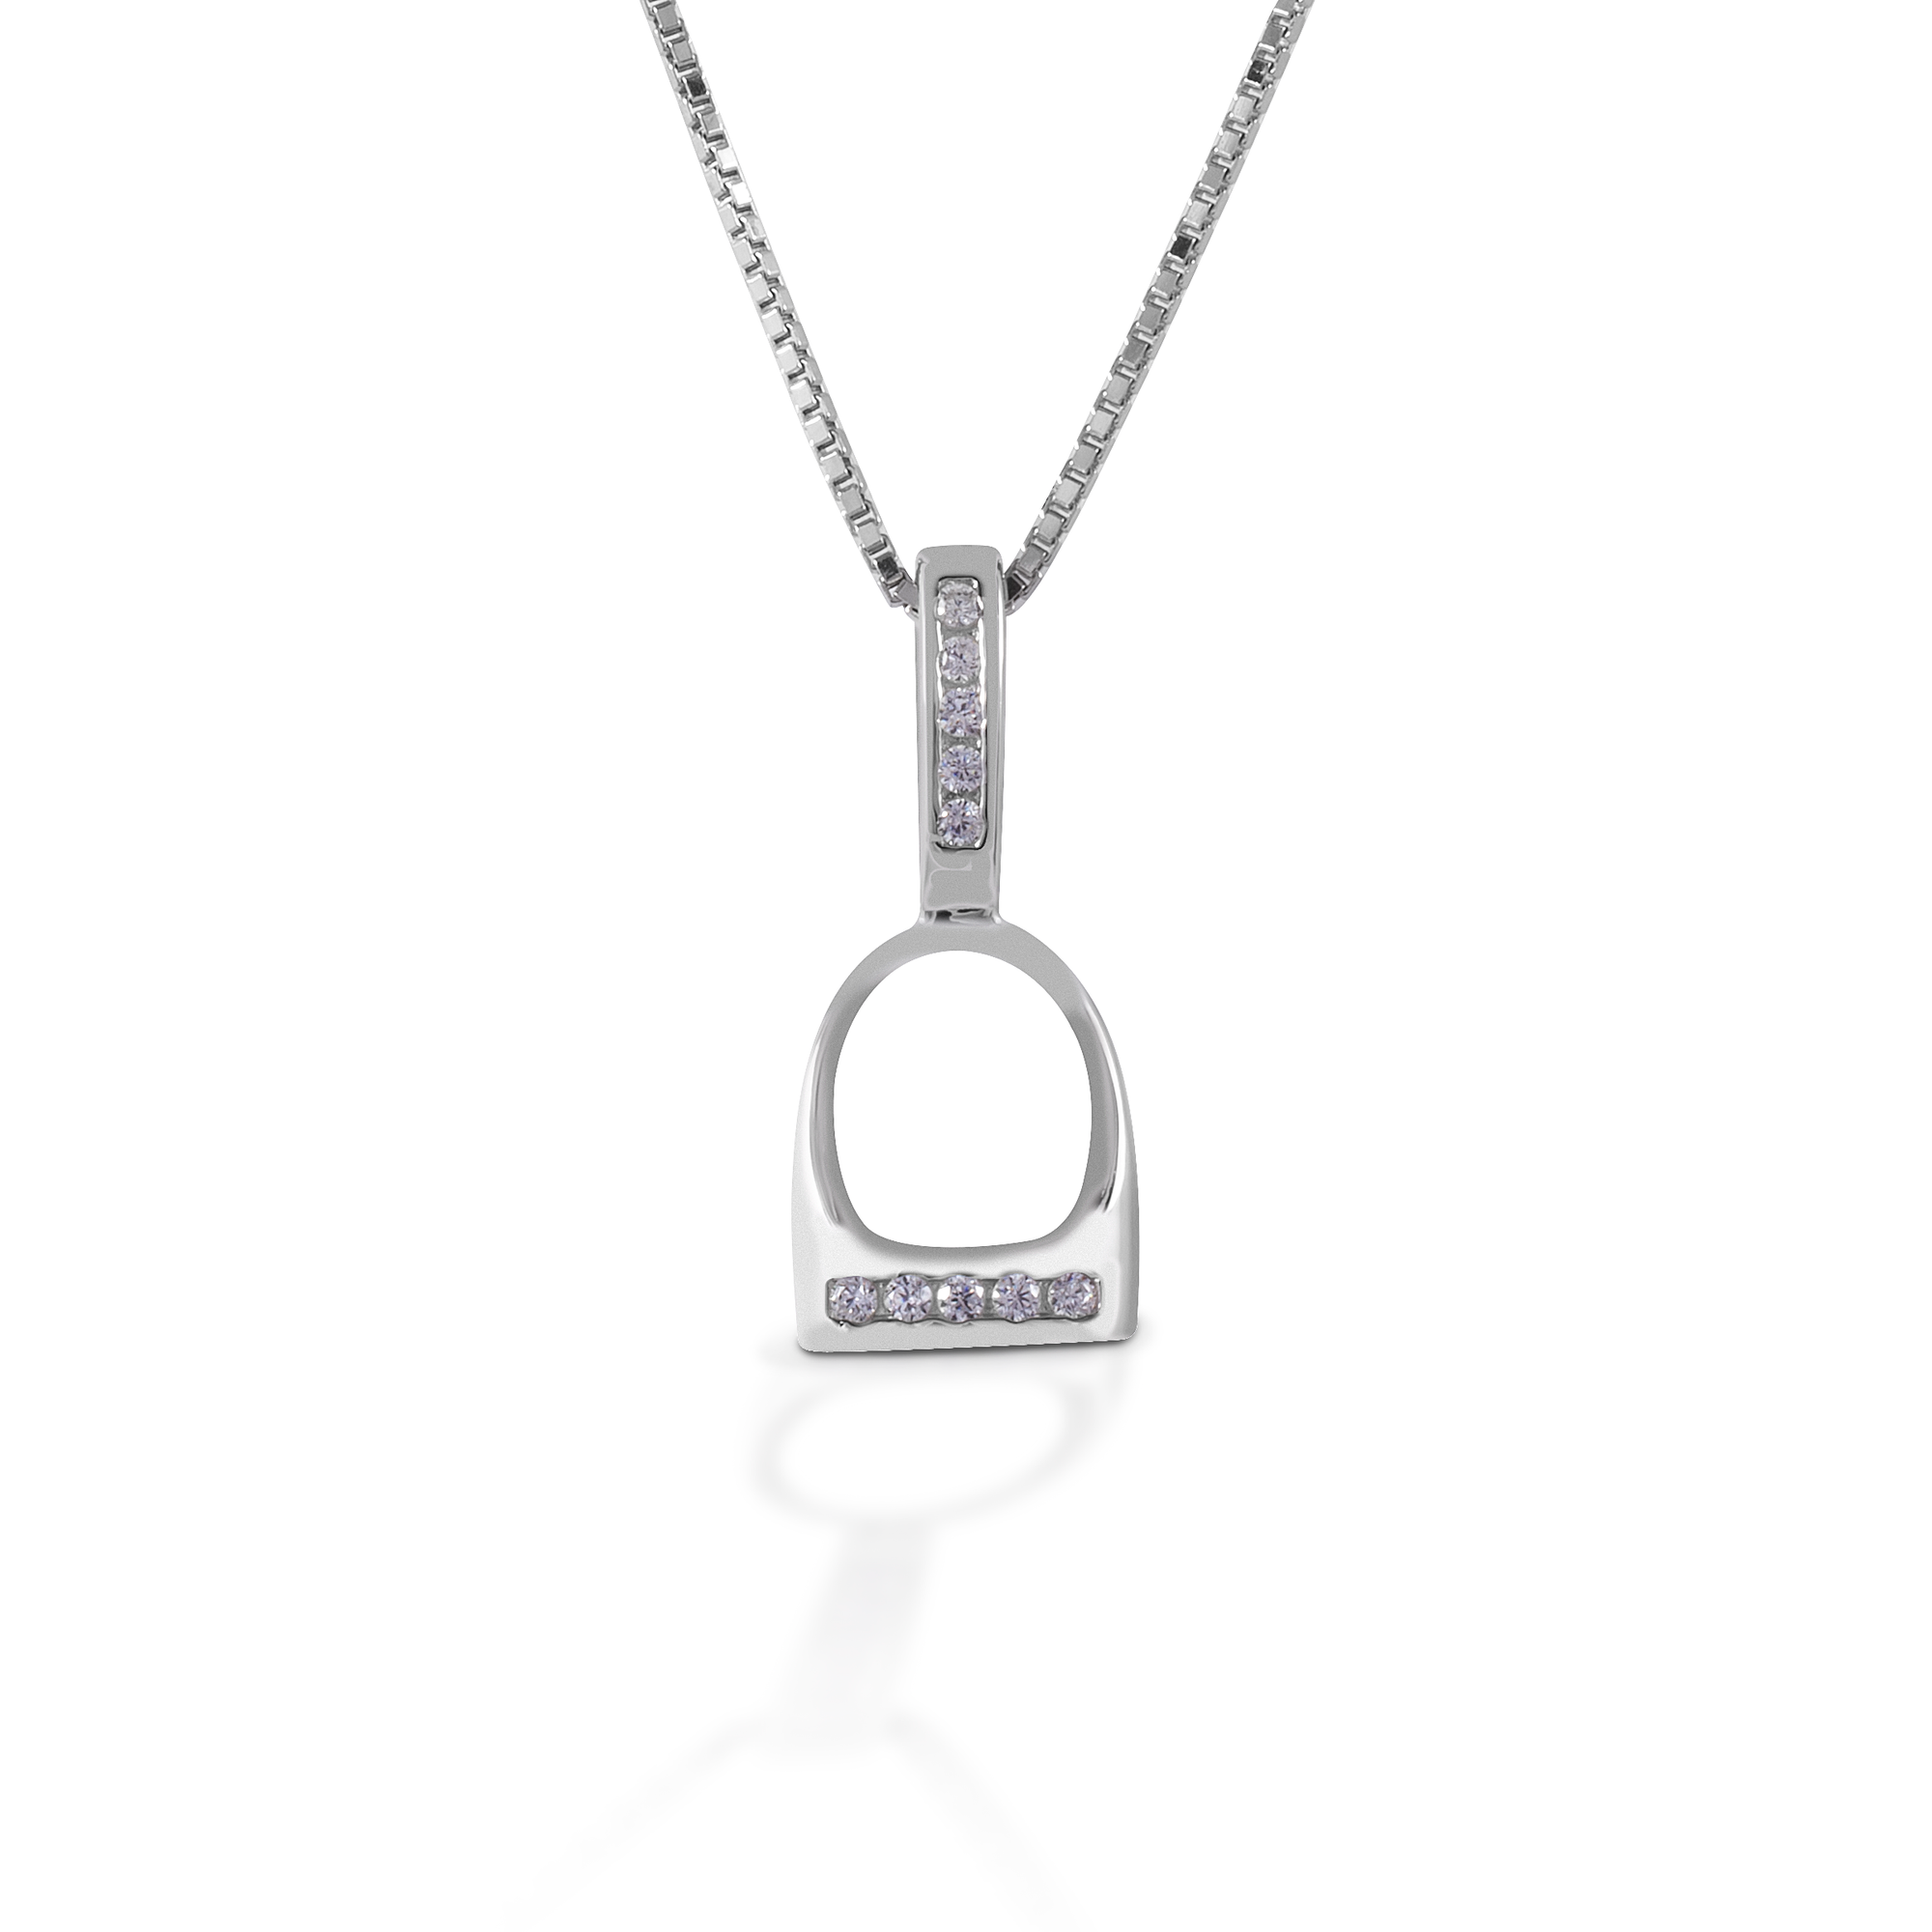 The Kelly Herd English Stirrup Necklace is a perfect tiny replica of a classic English fillis stirrup. Made of sterling silver, the base of the stirrup and the stirrup "leathers" are enhanced with clear CZ stones. Comes with an adjustable 16-18" chain.  Features      English stirrup pendant     Clear cubic zirconia stones     Sterling Silver     Adjustable 16-18" chain     10mm x 20mm